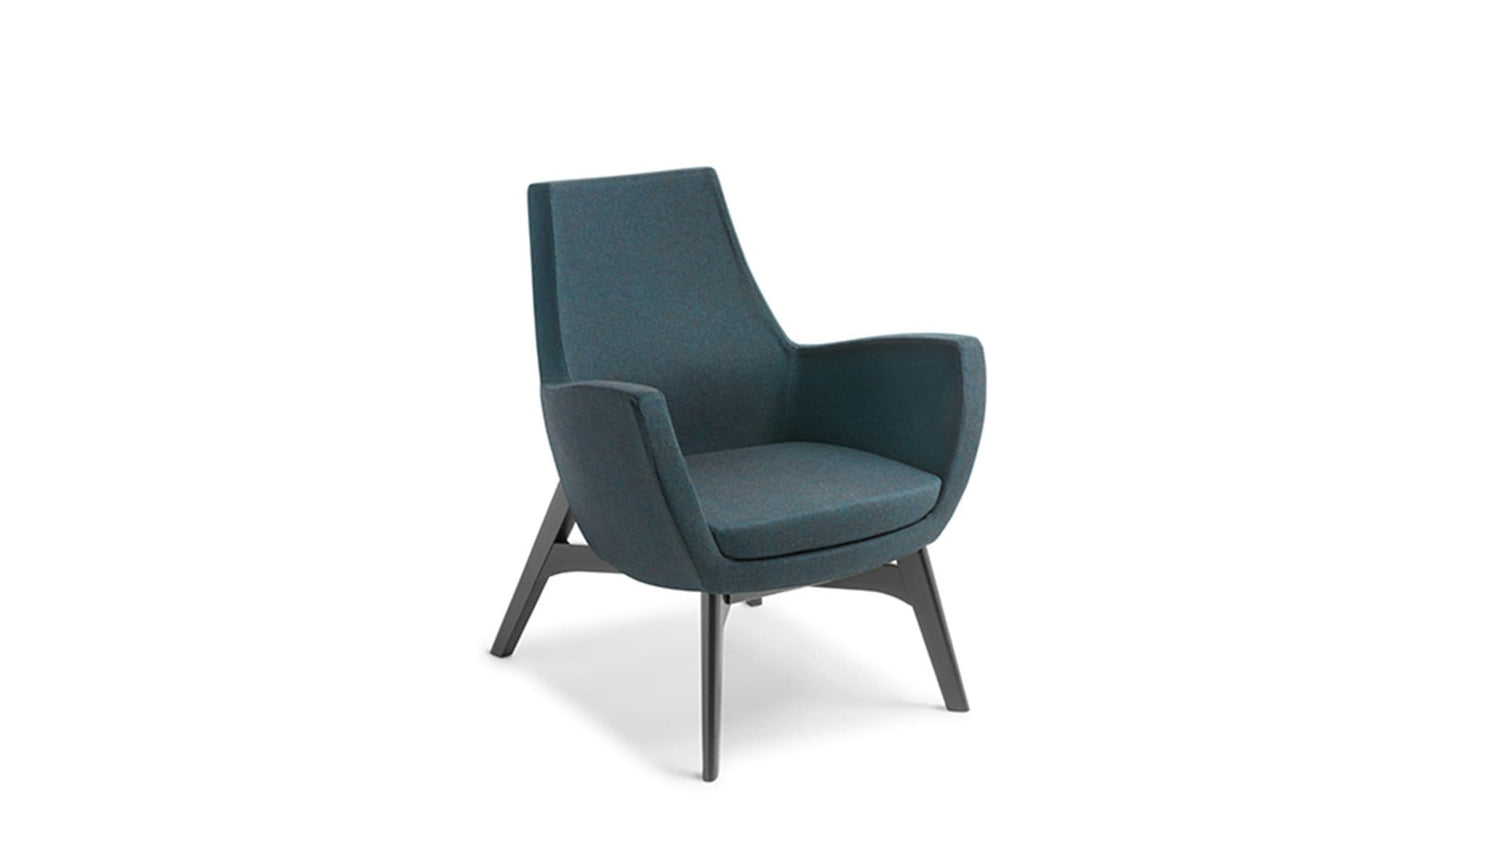 Soft Seating Timber base - Black Ash Treviso Chair